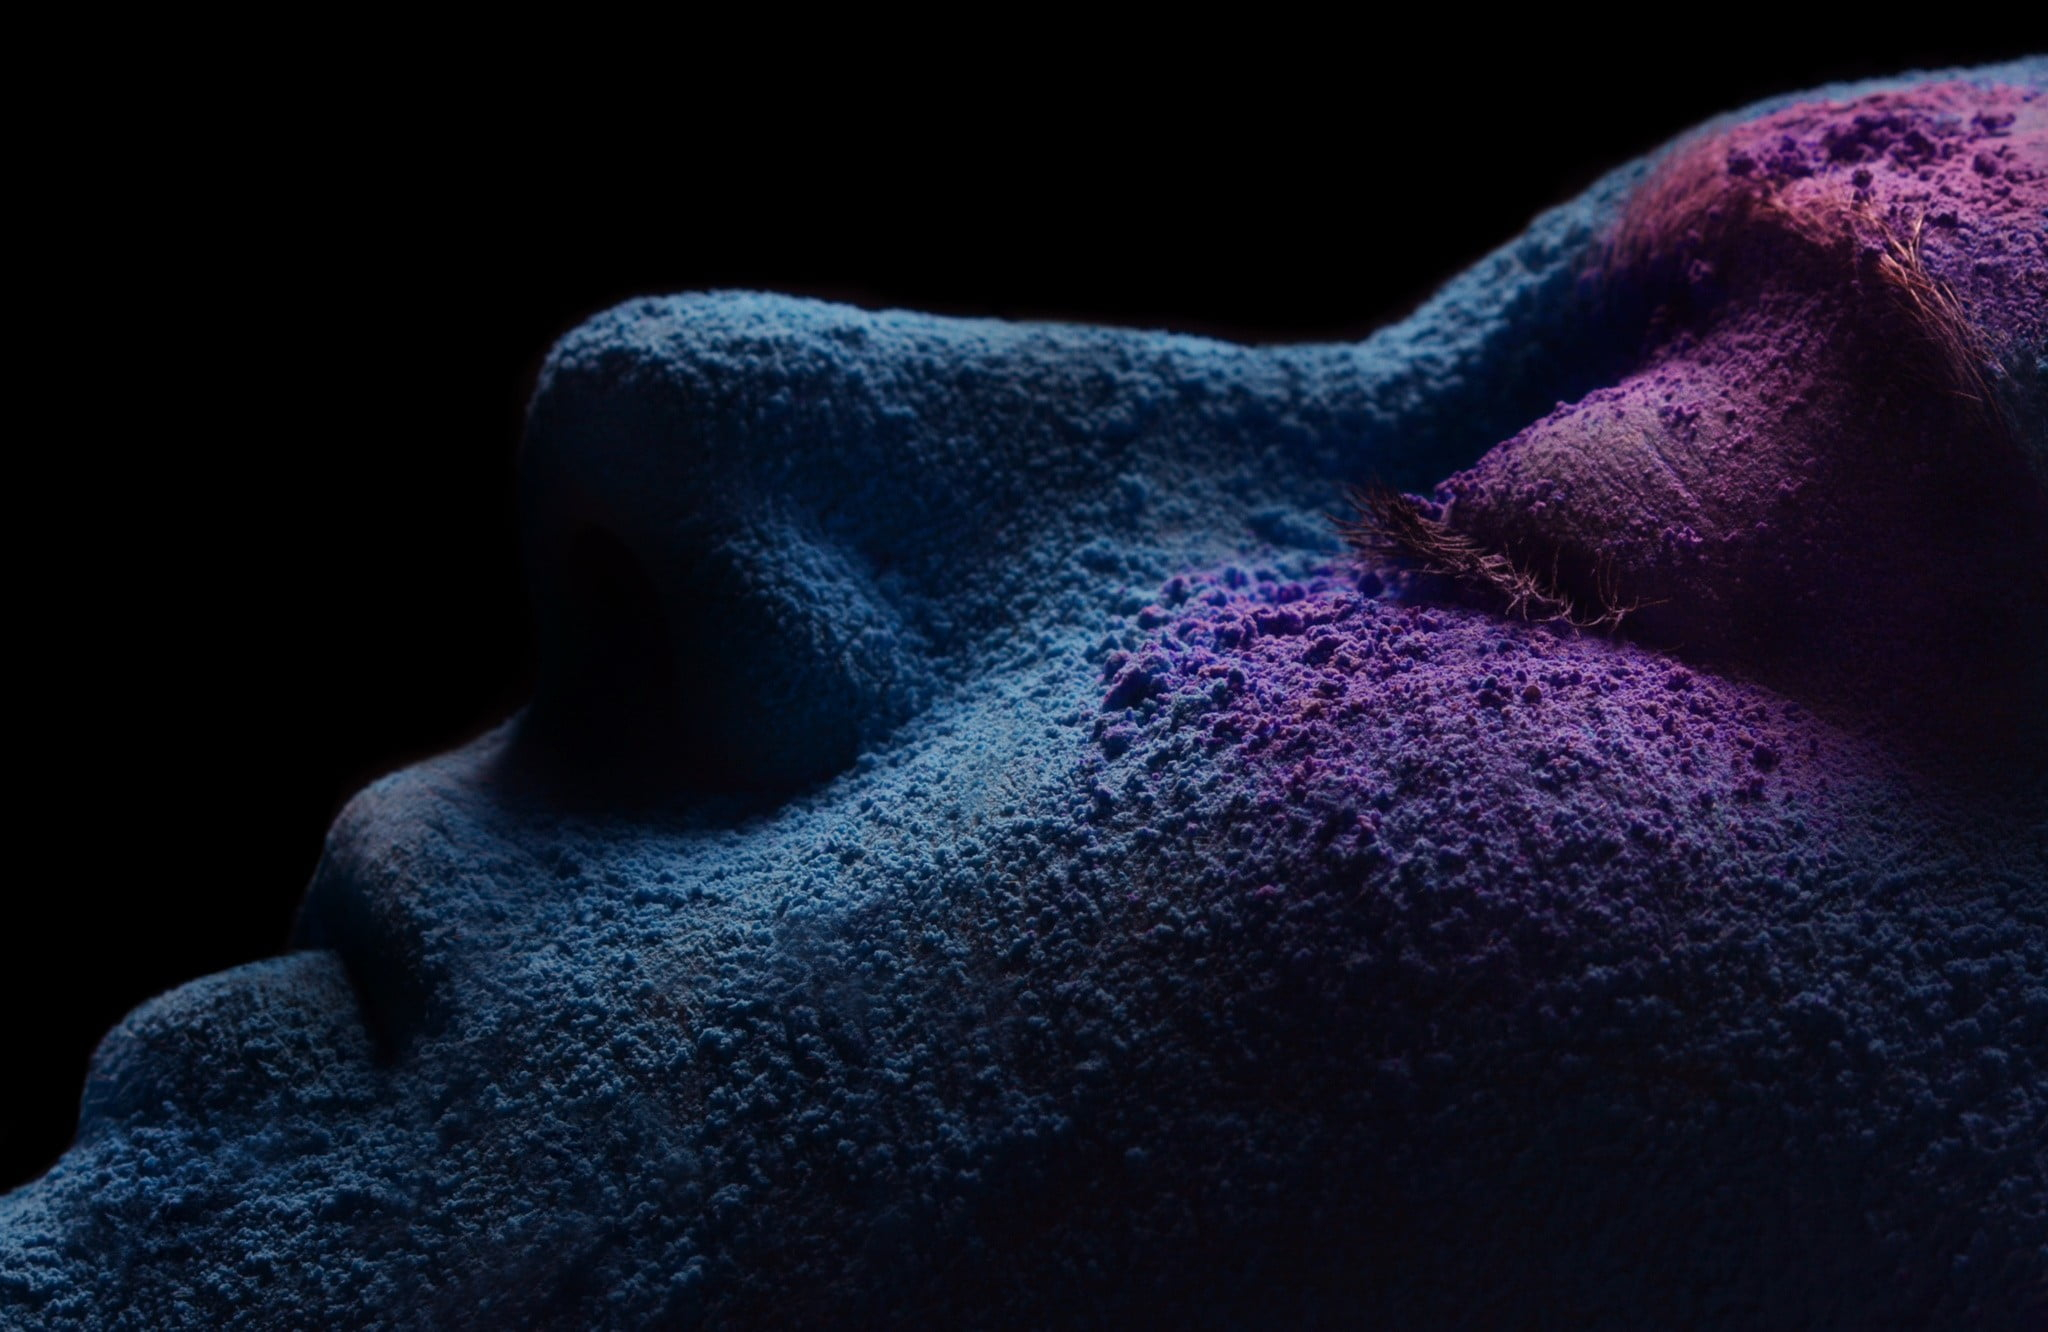 Wallpaper person face, person’s face with blue and purple powder in dark room